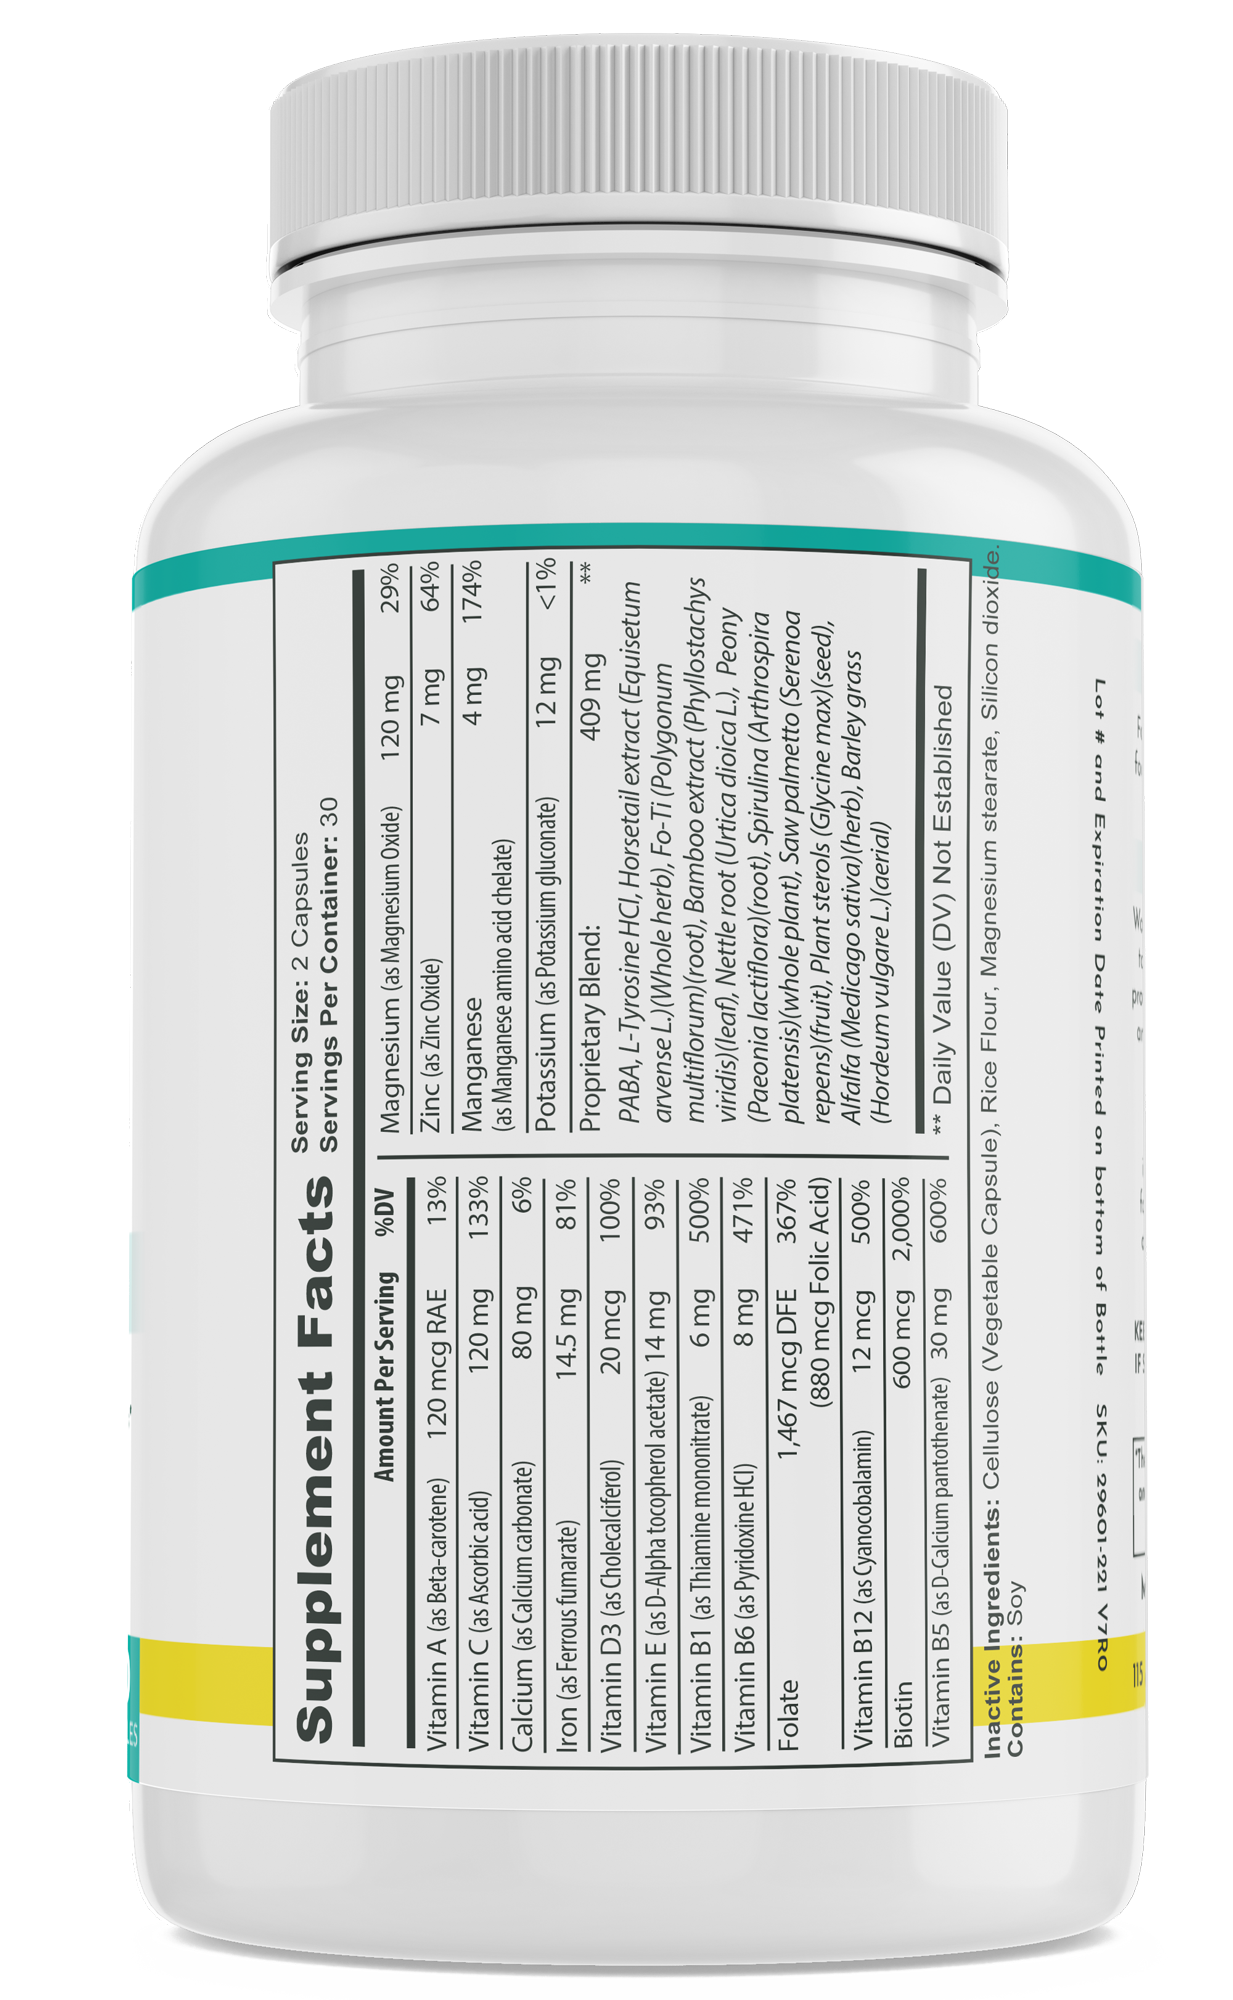 Hair Skin and Nails supplement fact label on a vitamin bottle